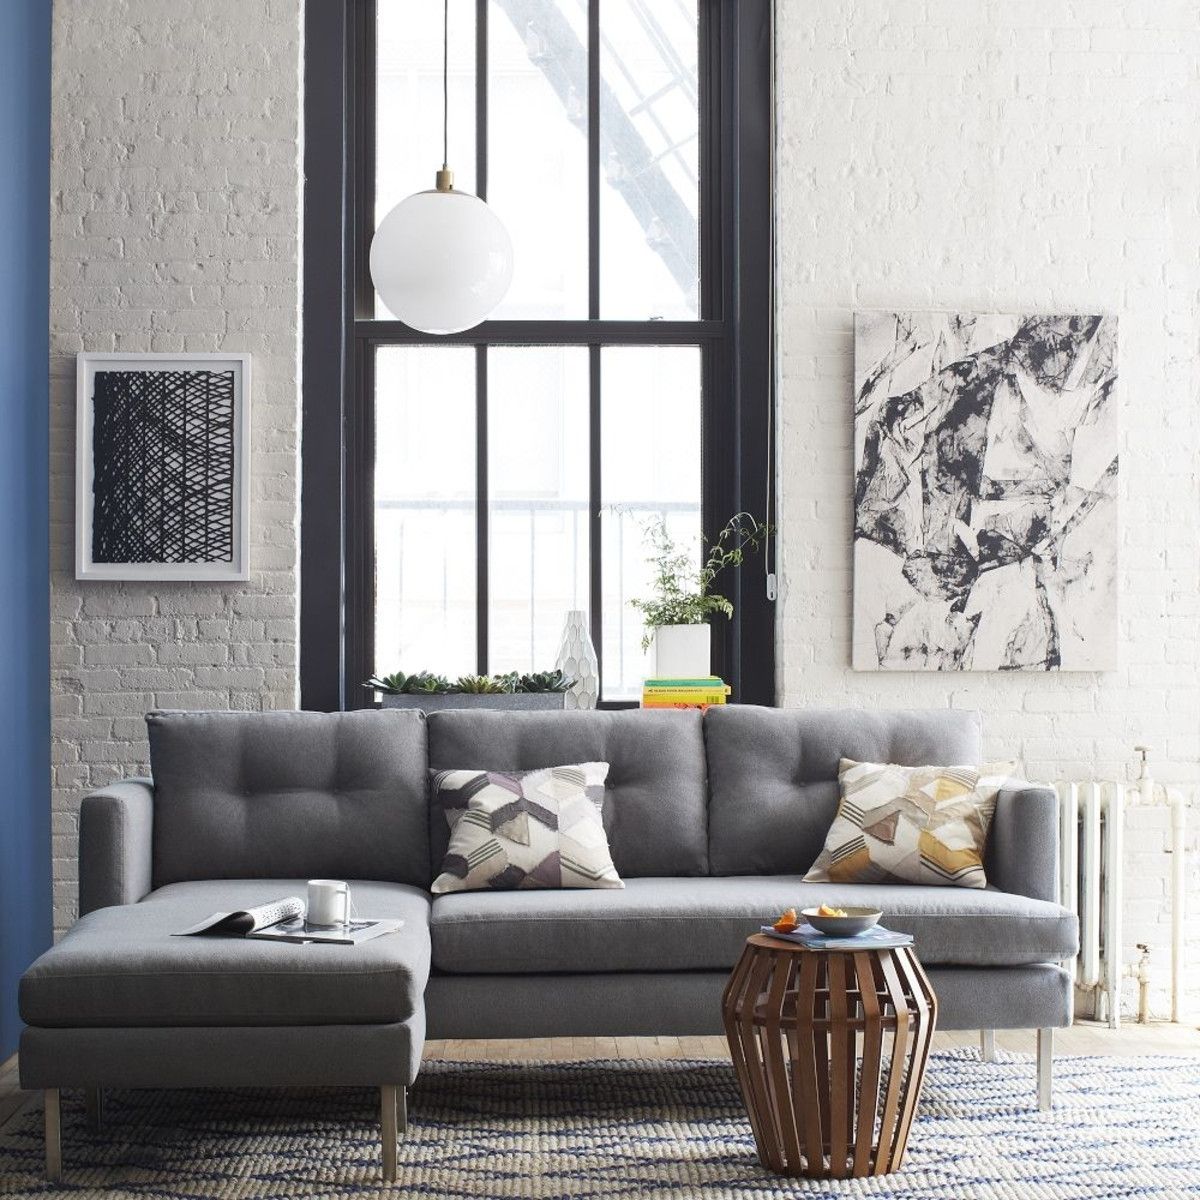 Jackson 2 Piece Chaise Sectional – Heather Grey Aud1809 | West Elm Regarding West Elm Sectional Sofas (View 4 of 10)